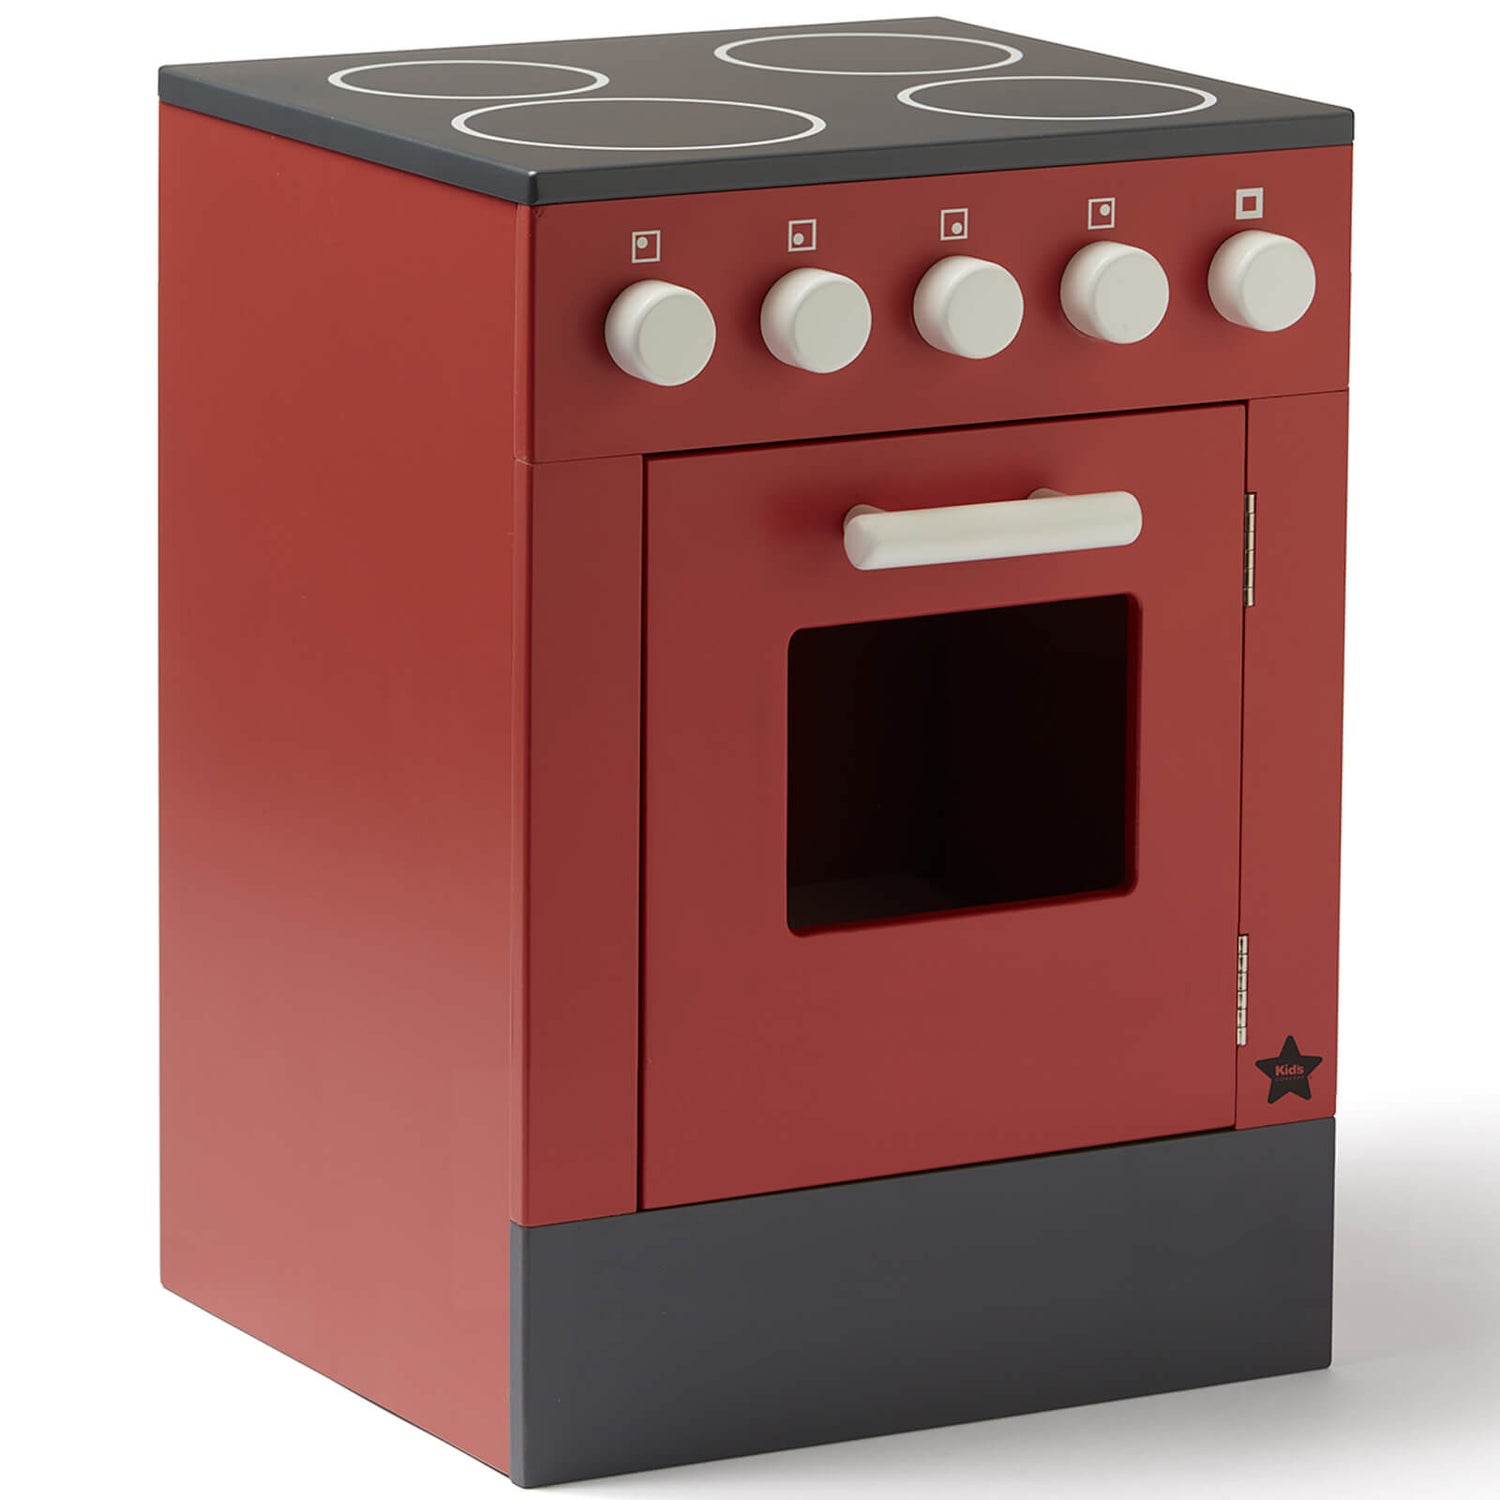 Kids Concept Stove - Red